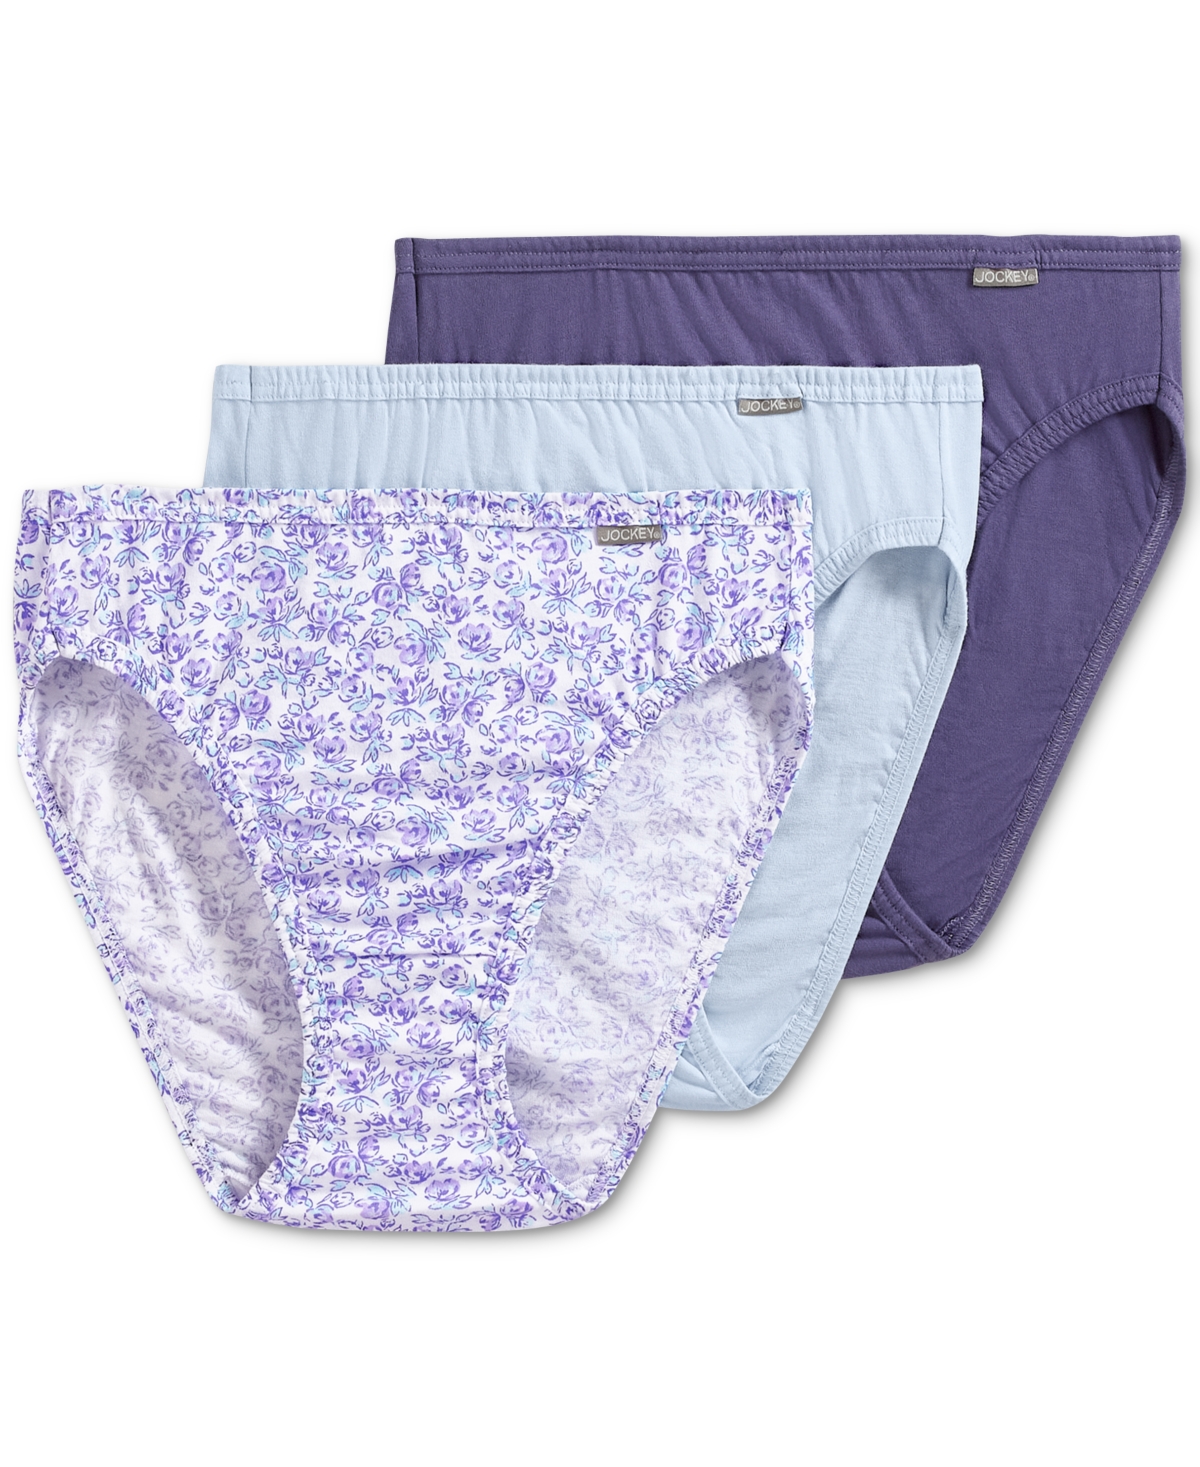 Shop Jockey Elance French Cut 3 Pack Underwear 1485 1487, Extended Sizes In Midnight Iris,bouquet Bloom,frothy Blue